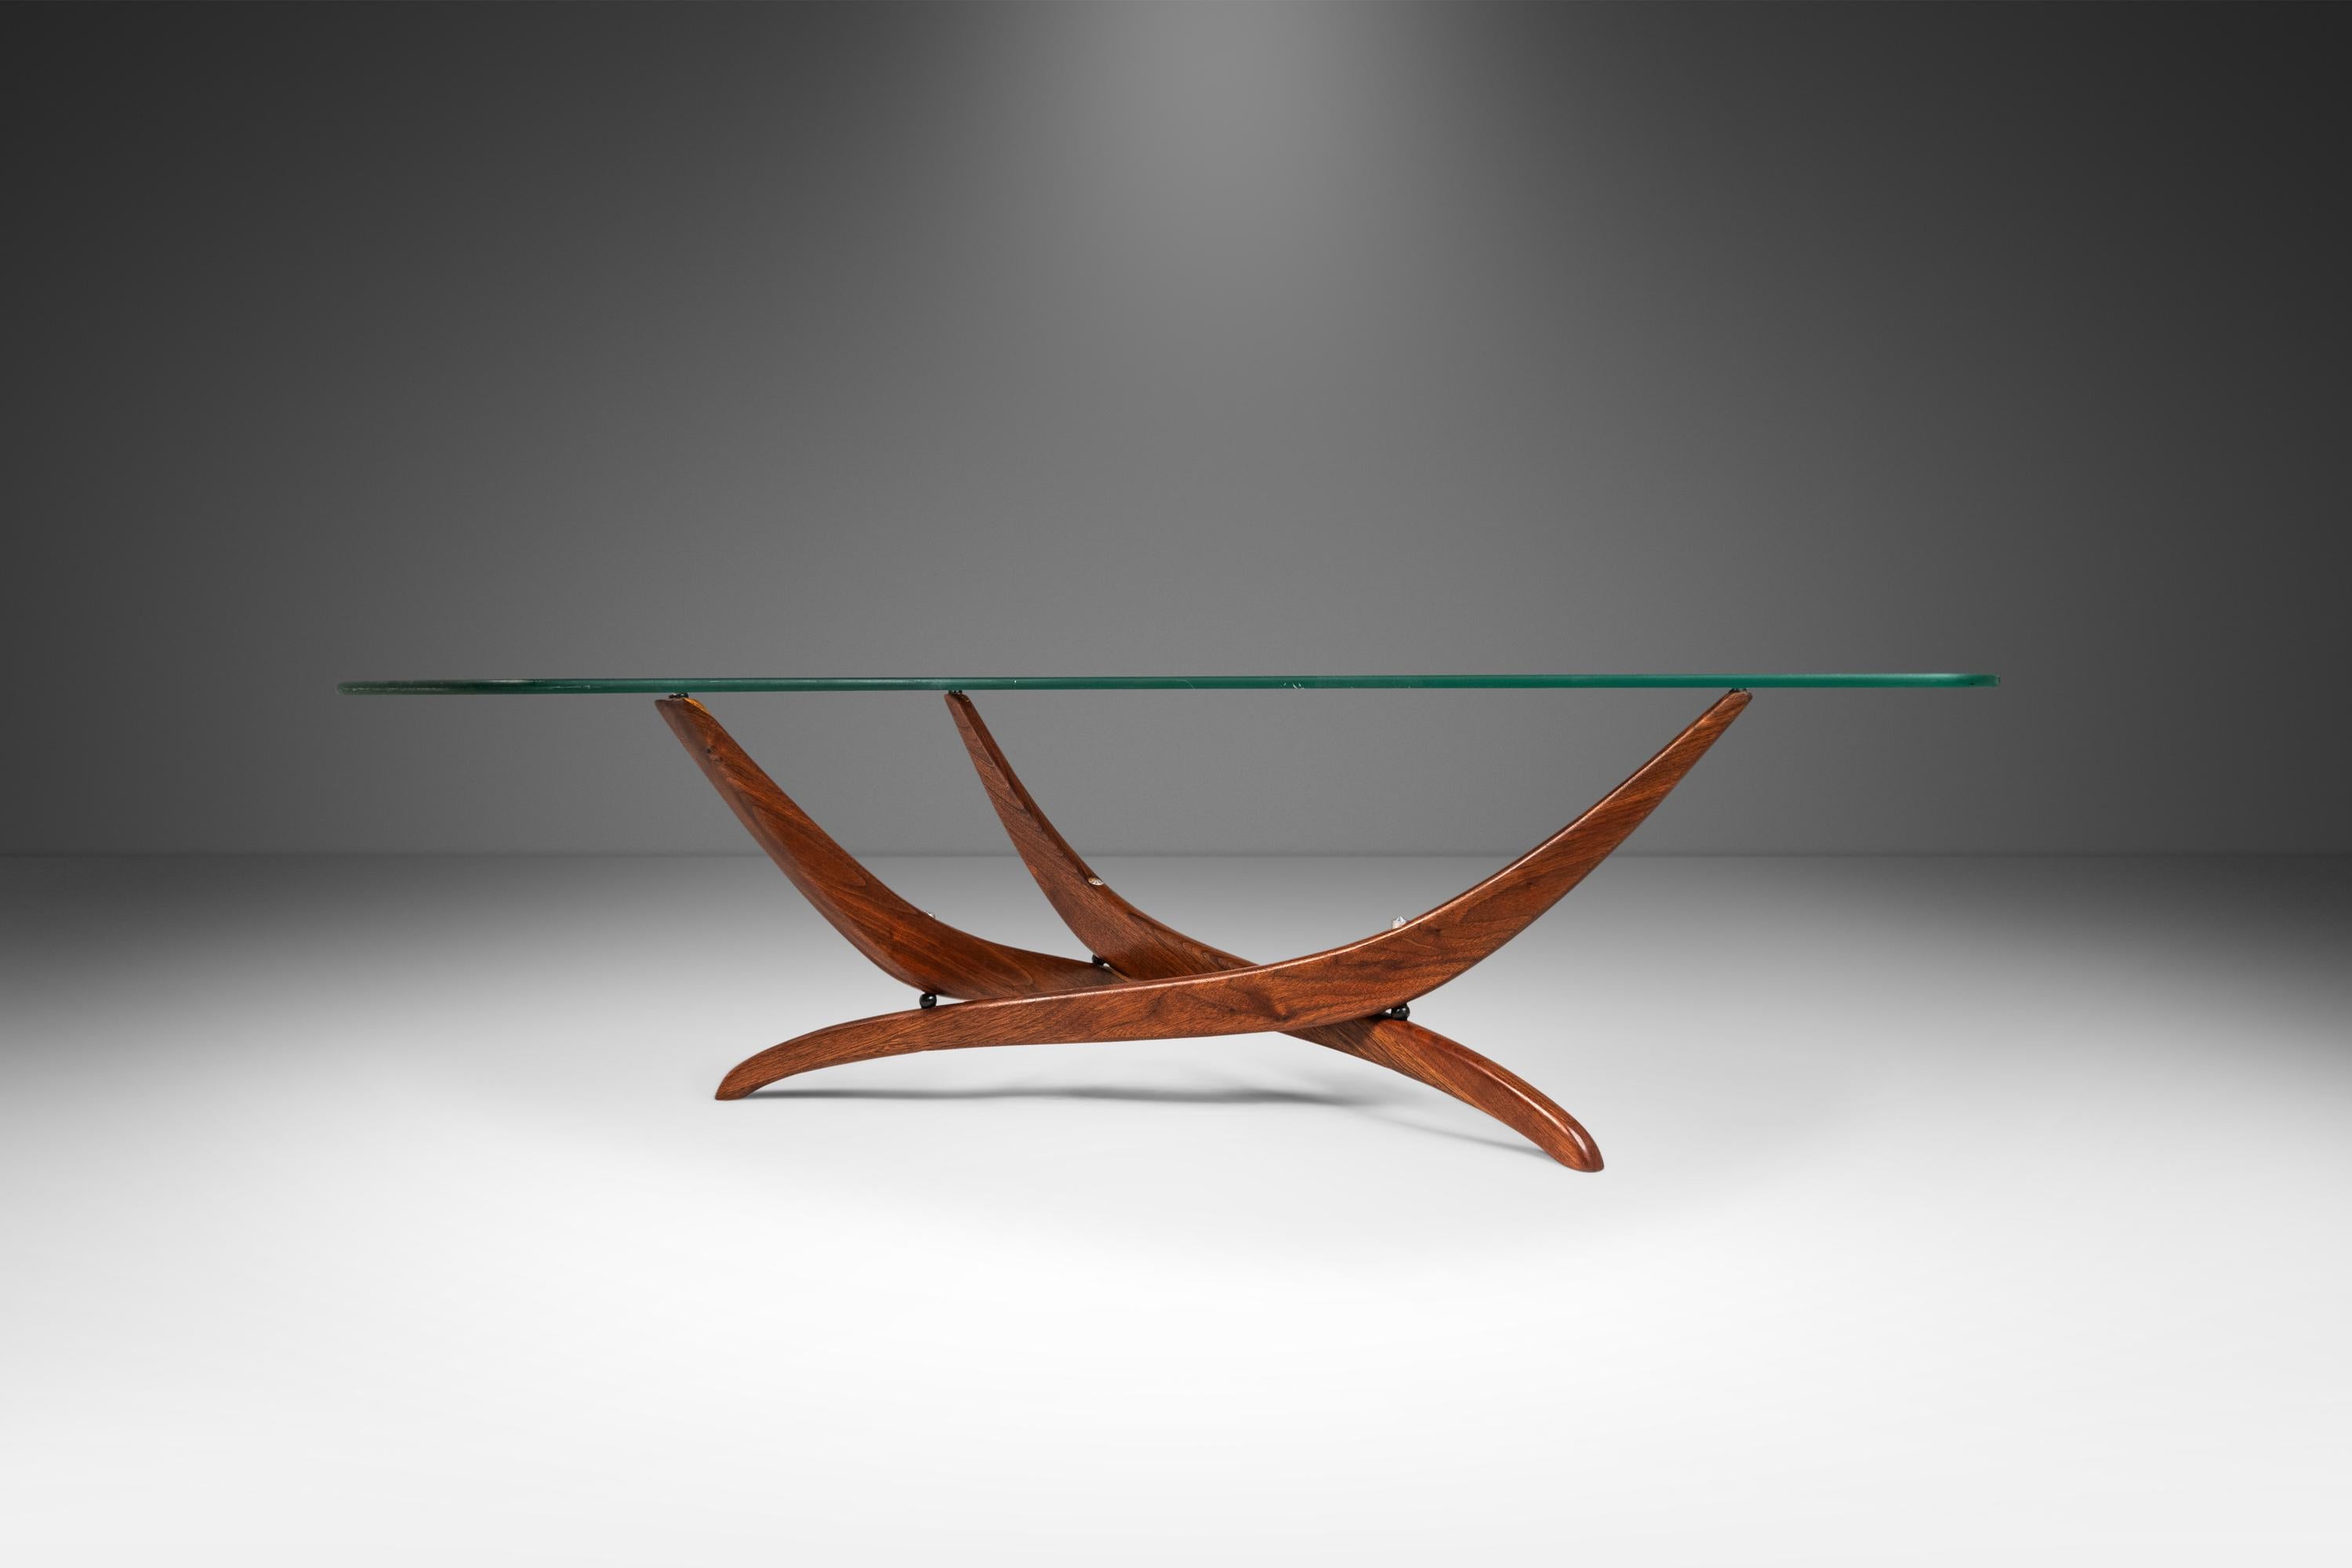  Introducing an iconic sculptural coffee table by Forest Wilson. Featuring intricately carved solid walnut legs that borrow from fluid forms found in nature, it’s almost as if Wilson is contouring the beams of walnut back to their original shape as